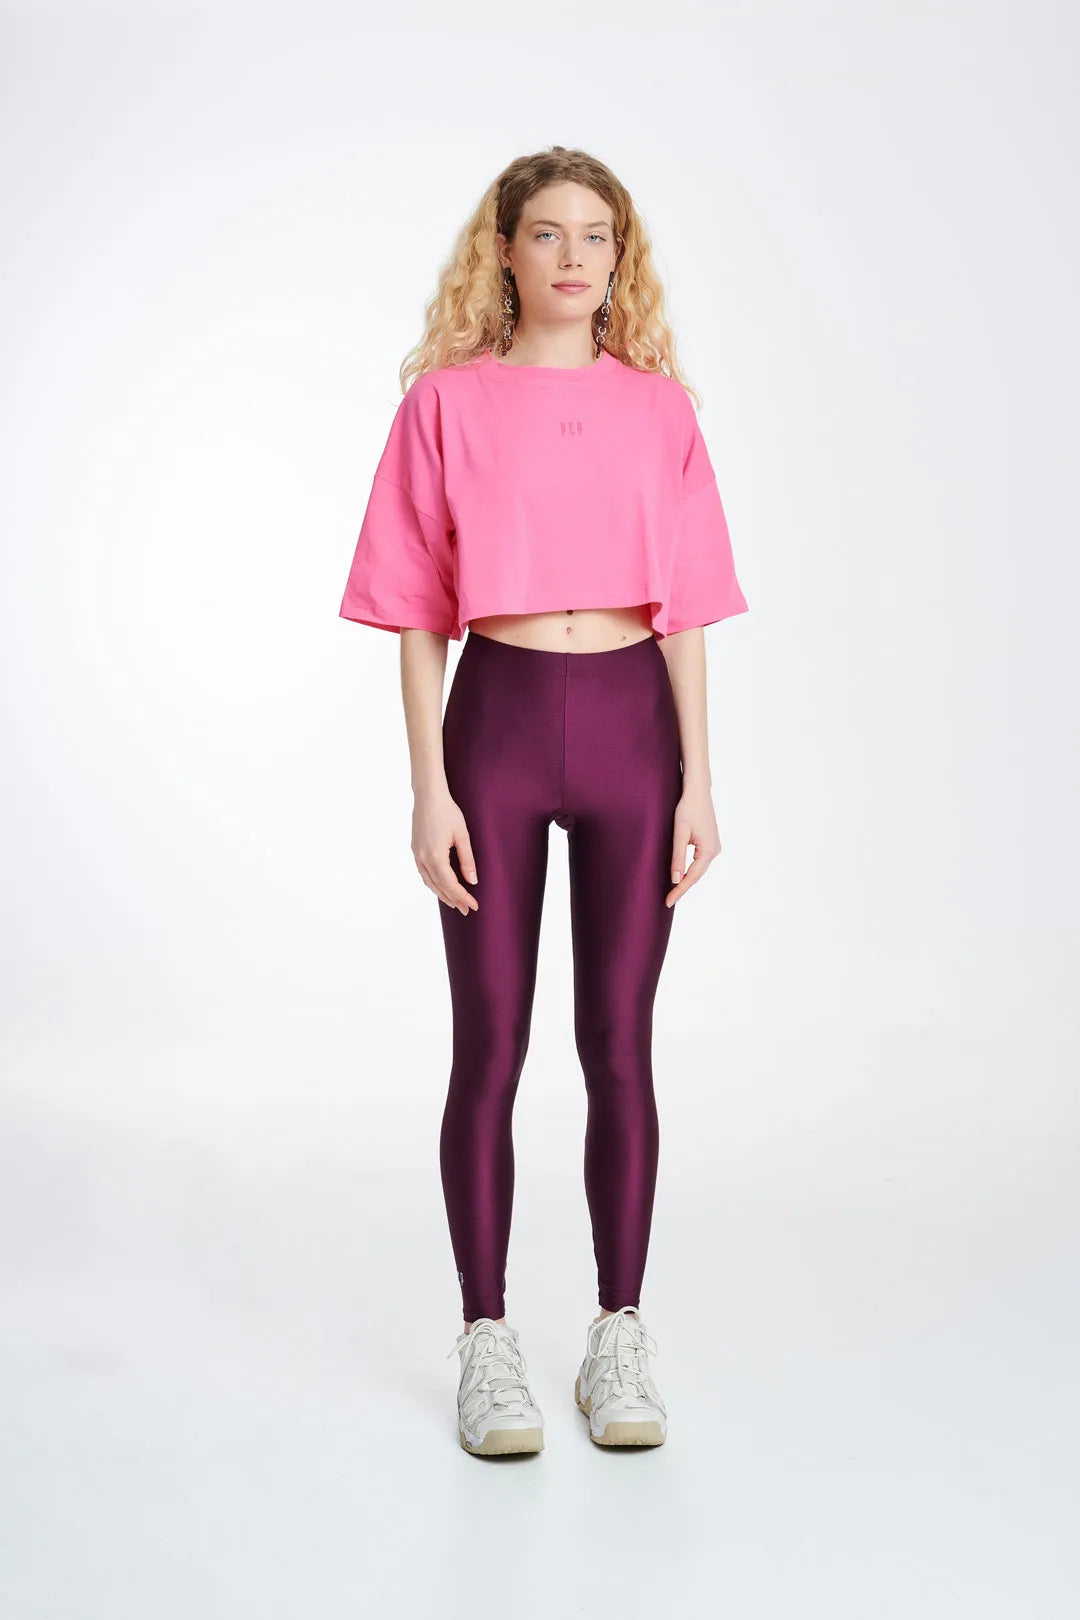 PCP JAQUELINE LEGGINGS - AUBERGINE - EXCLUSIVE Leggings from PCP - Just $39.00! SHOP NOW AT IAMINHATELOVE BOTH IN STORE FOR CYPRUS AND ONLINE WORLDWIDE